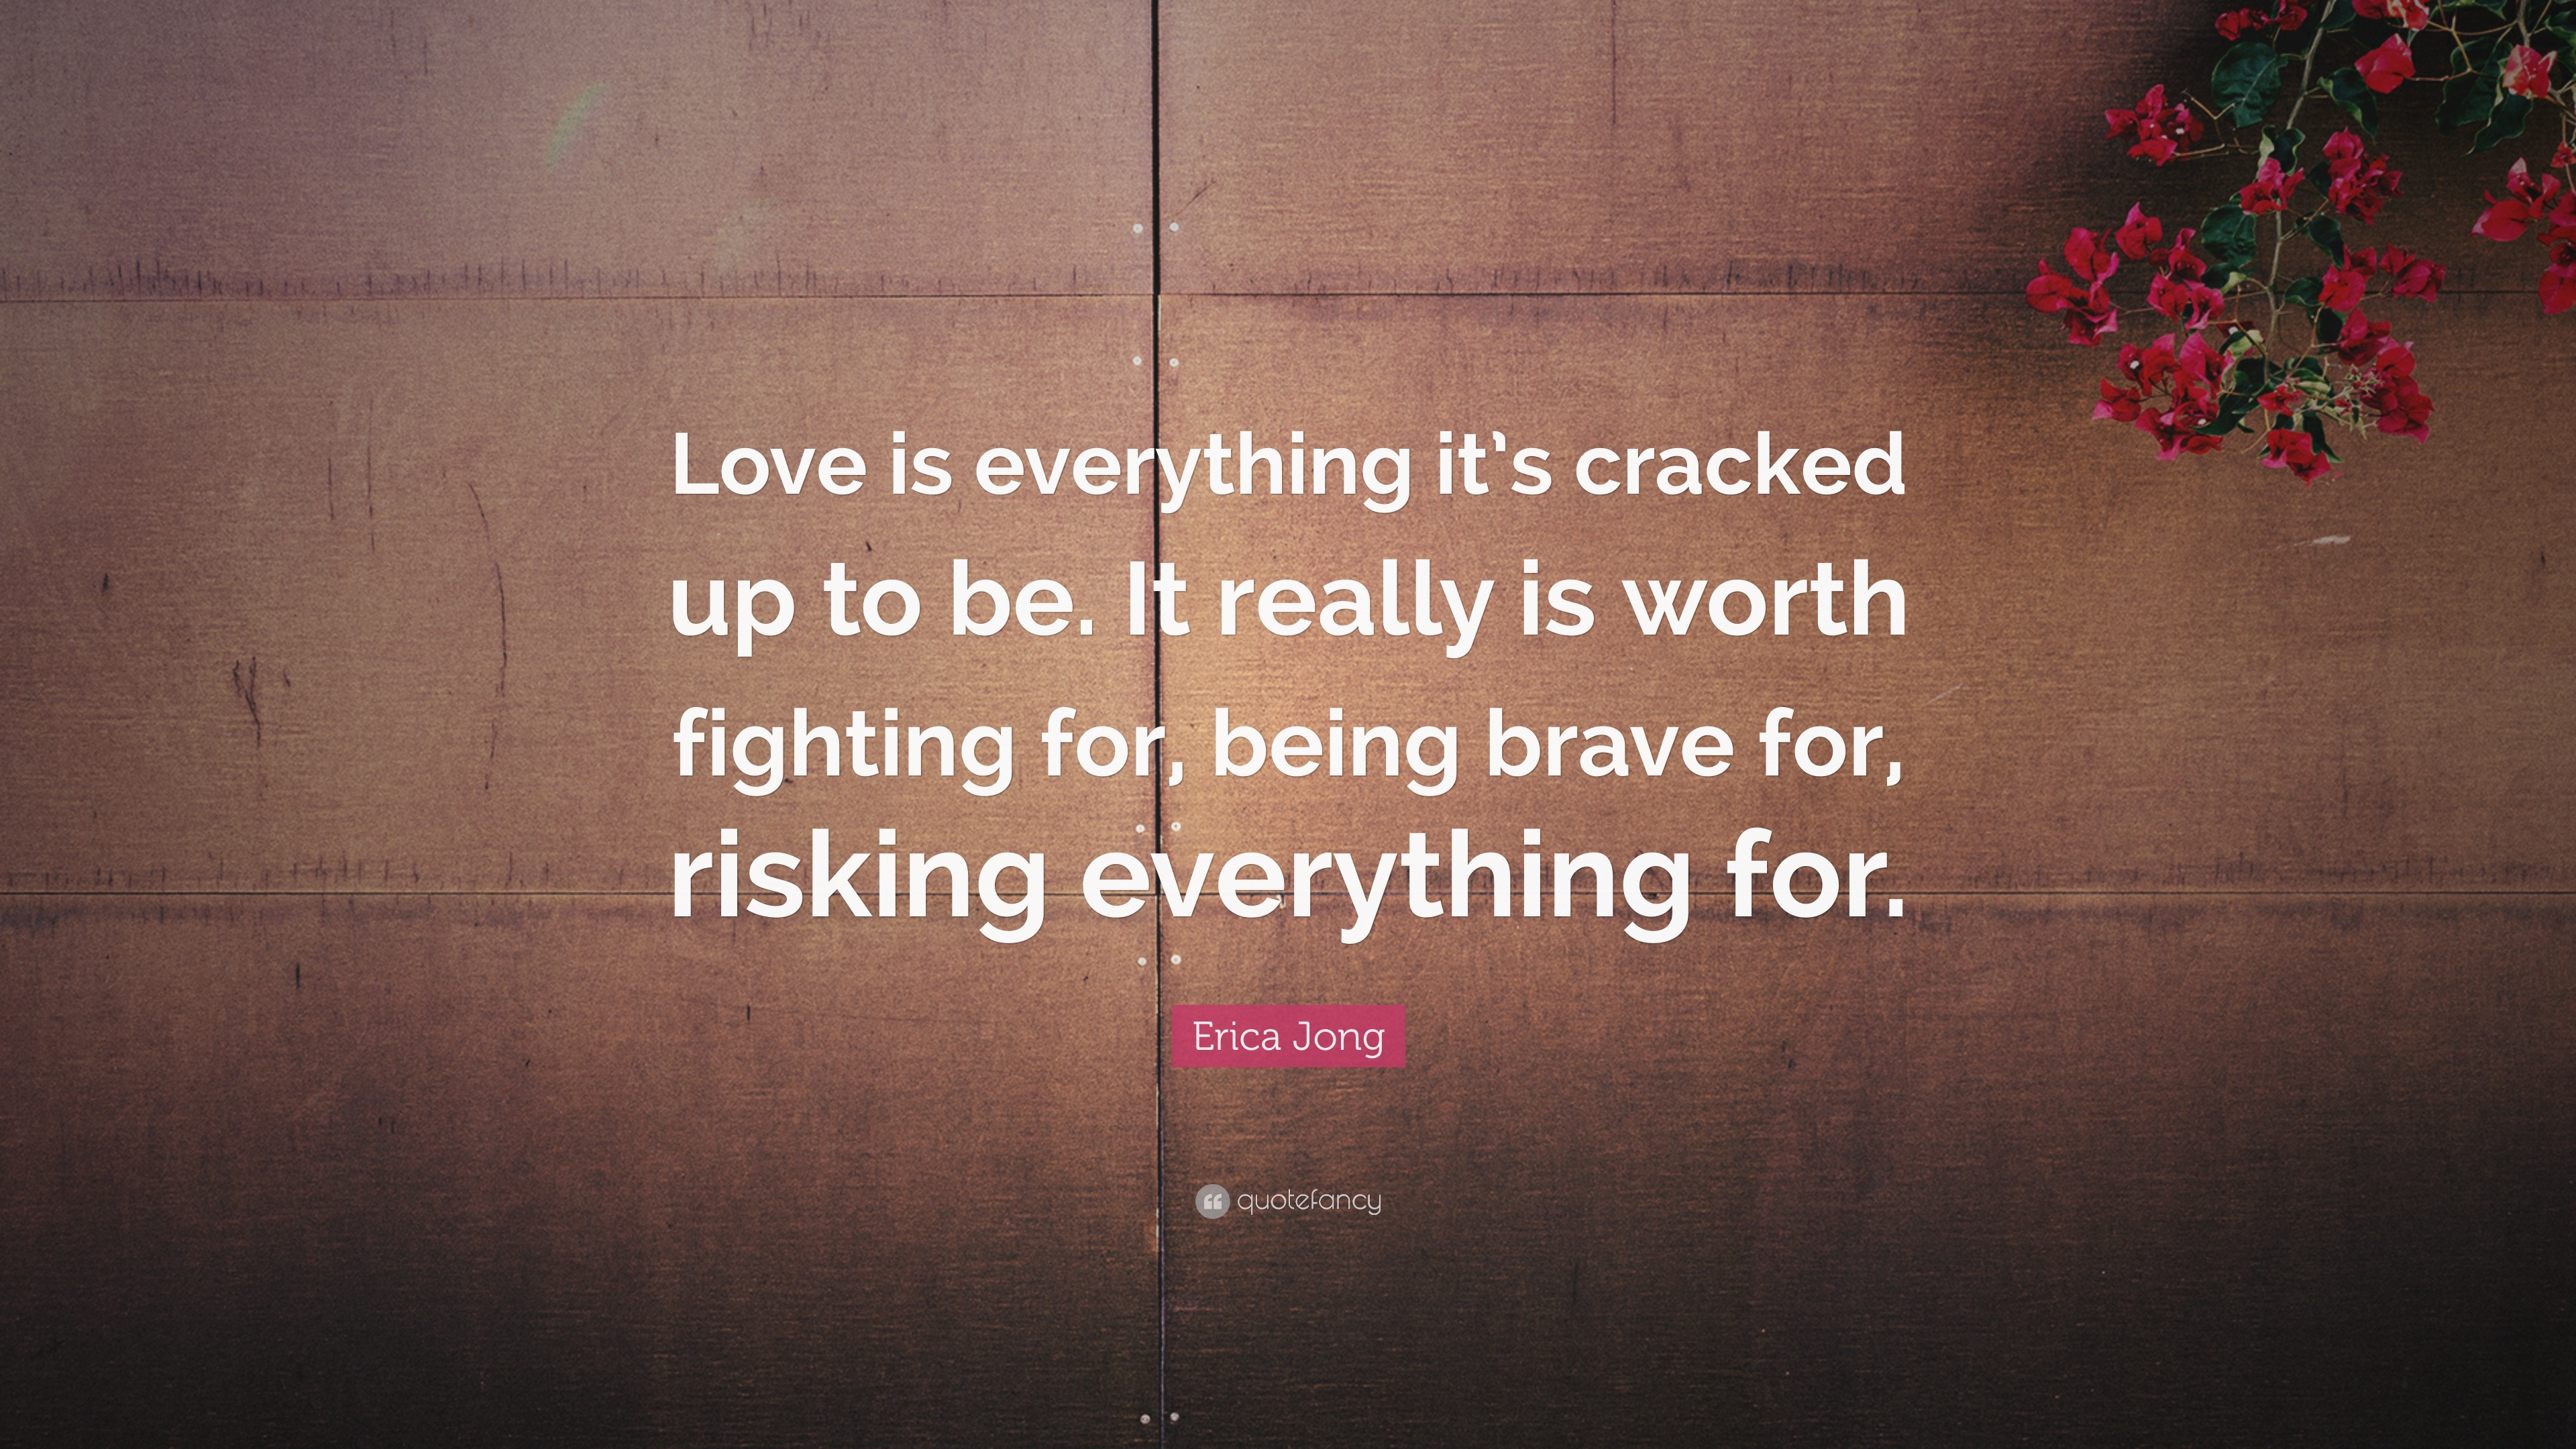 Erica Jong Quote “Love is everything it s cracked up to be It really